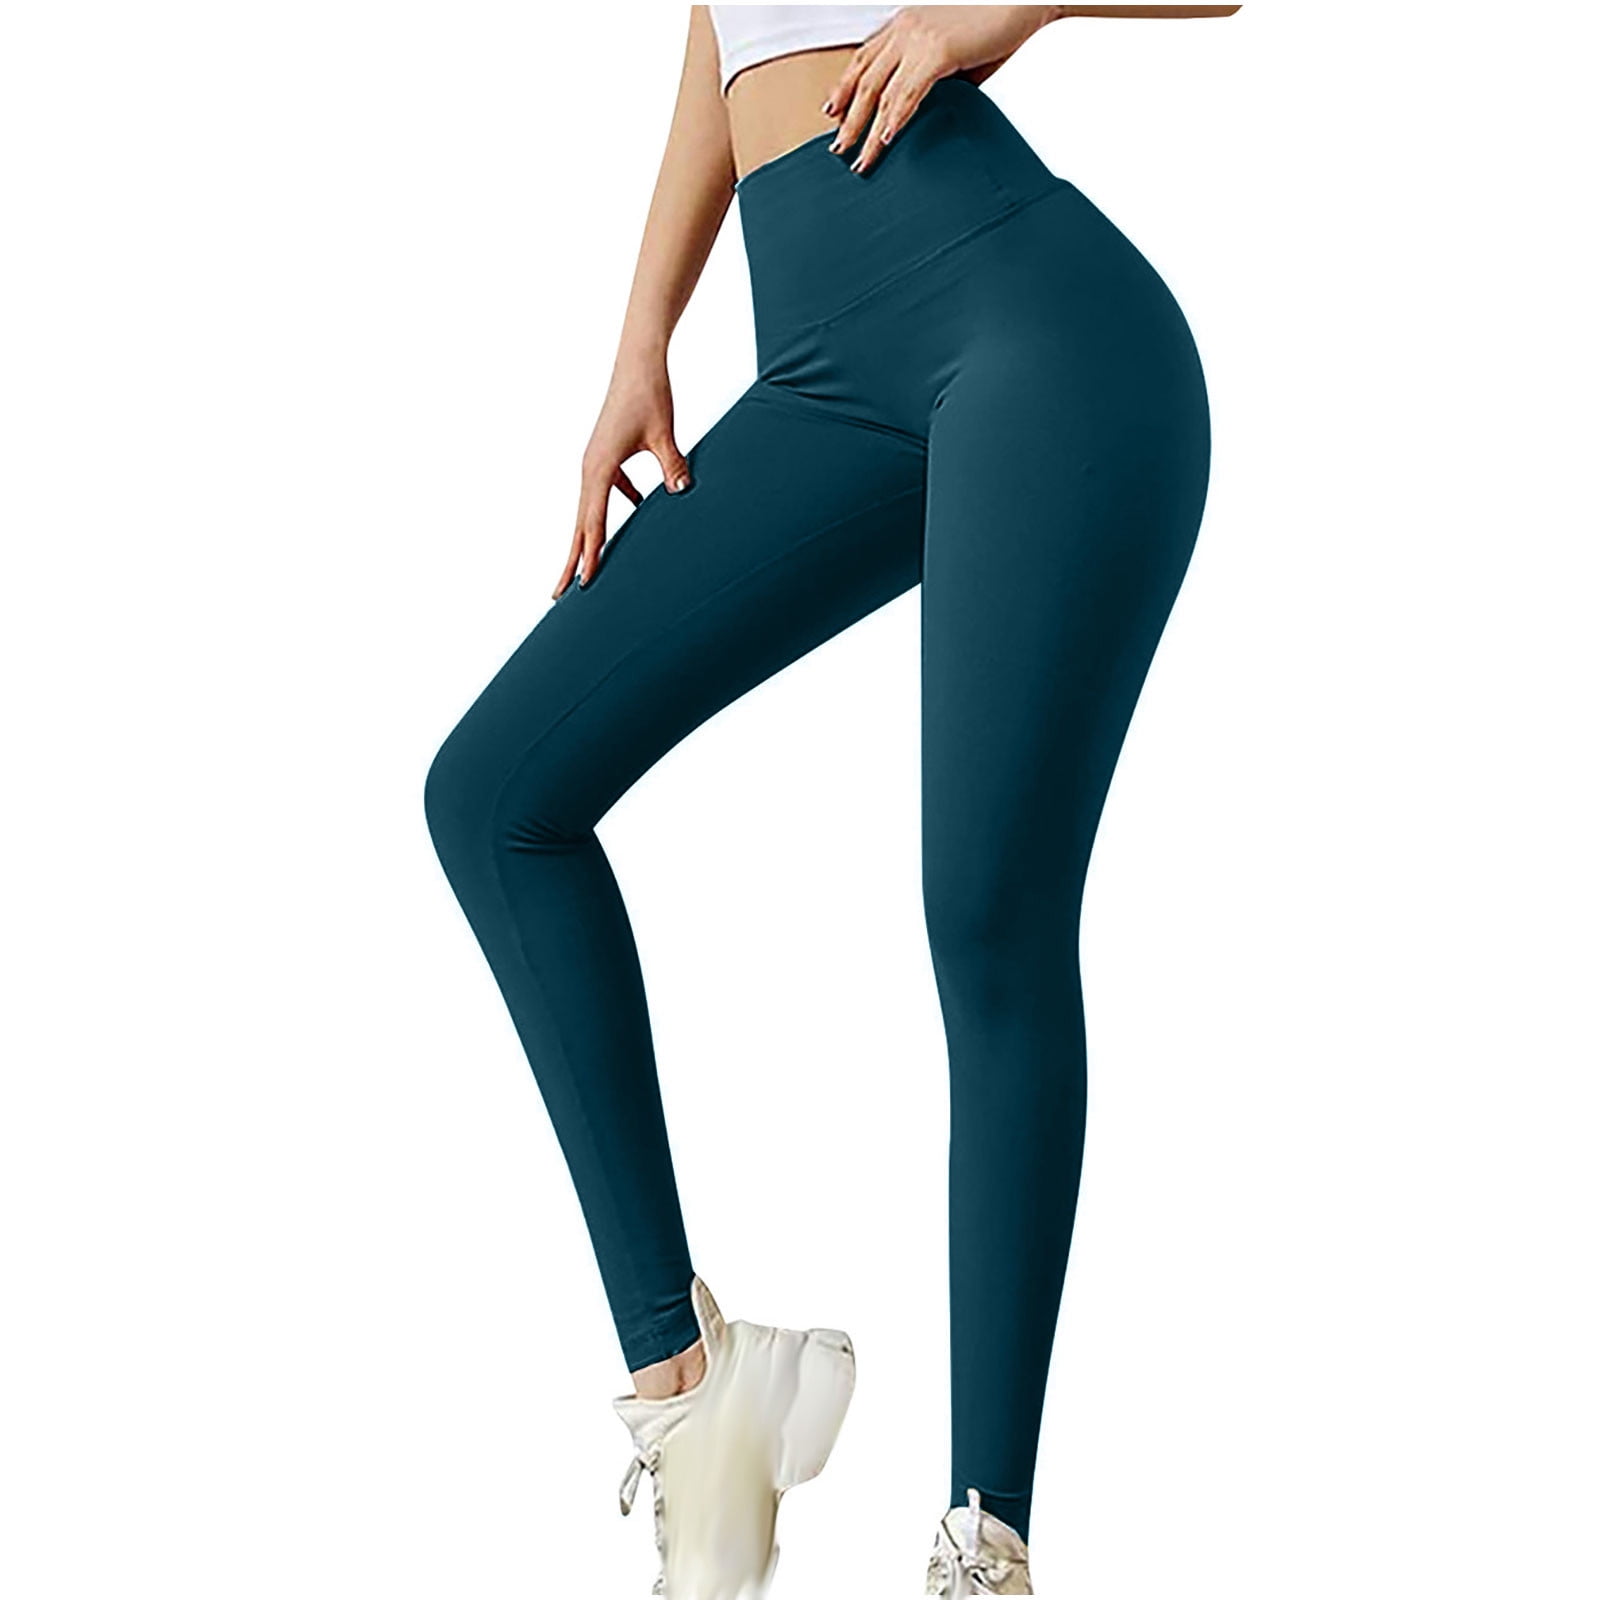 HAPIMO Sales Women's Yoga Pants High Waist Tummy Control Workout Pants Hip  Lift Tights Stretch Athletic Slimming Running Yoga Leggings for Women Green